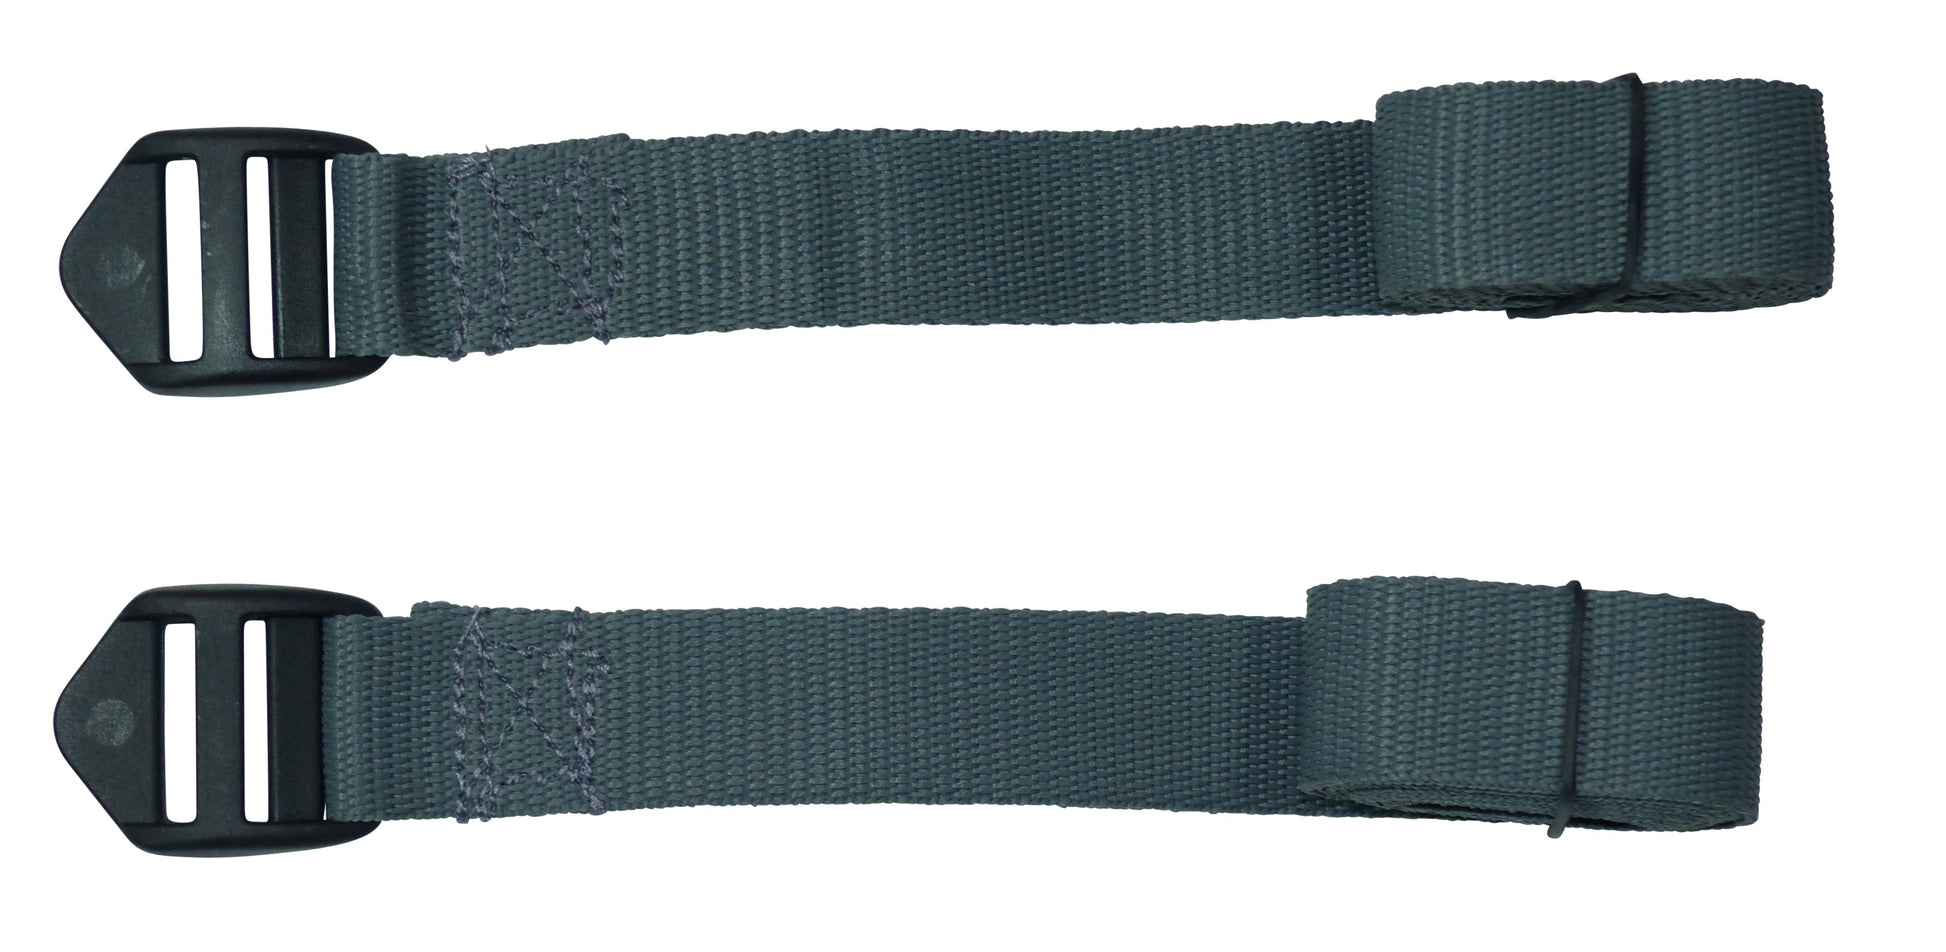 Benristraps 25mm Webbing Strap with Superstrong Ladderlock Buckle (Pair) in grey